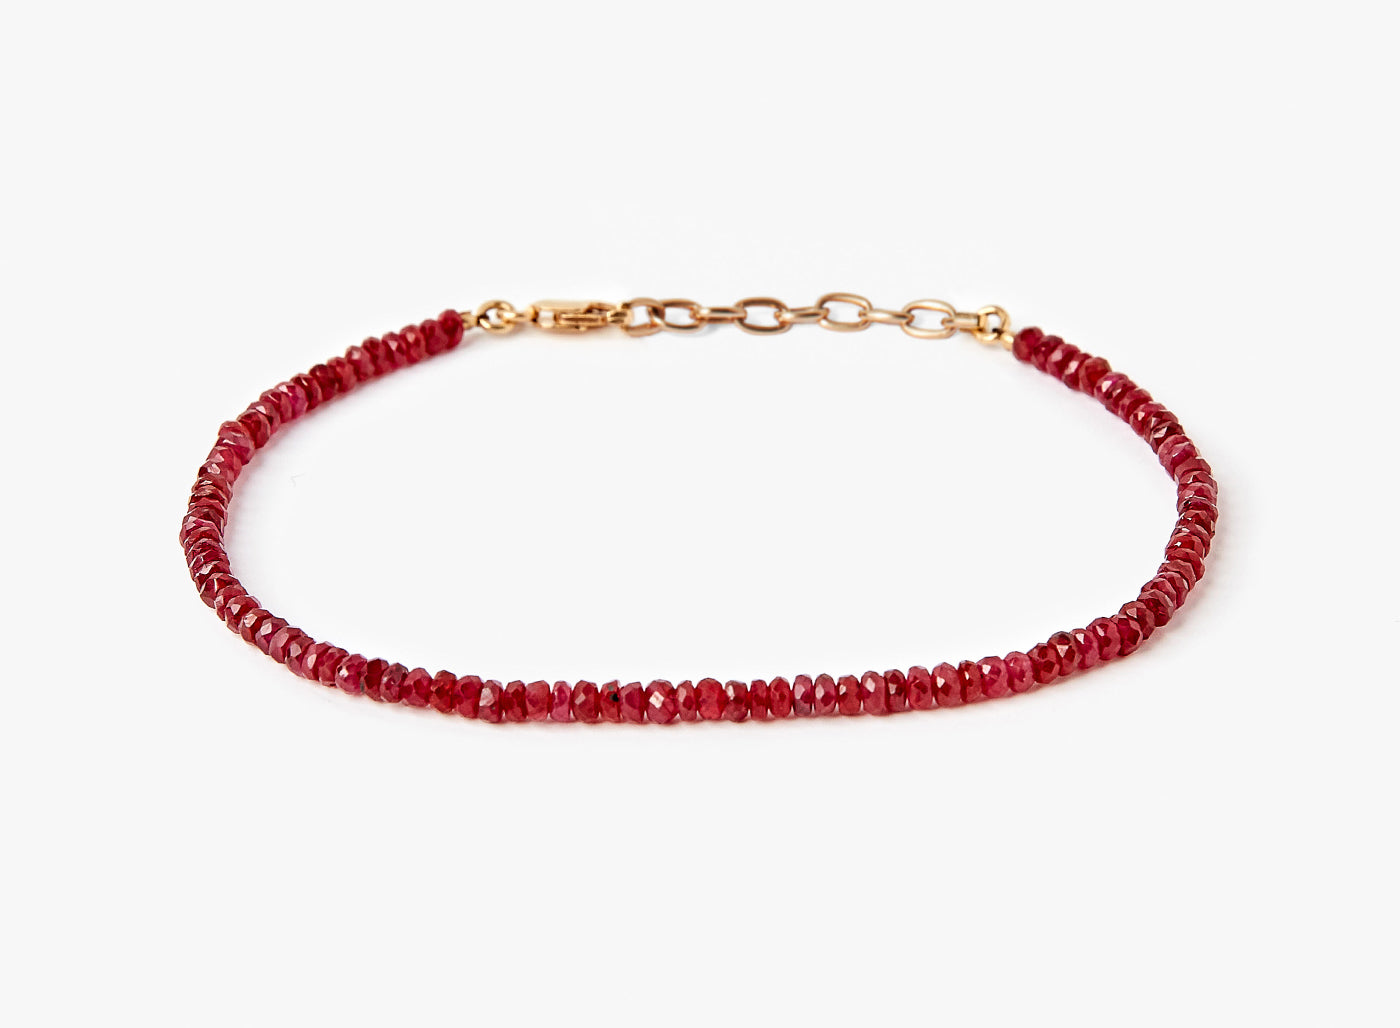 BEADED STONES RUBY BRACELET 312: this adjustable natural ruby bracelet is finished with 18k gold links